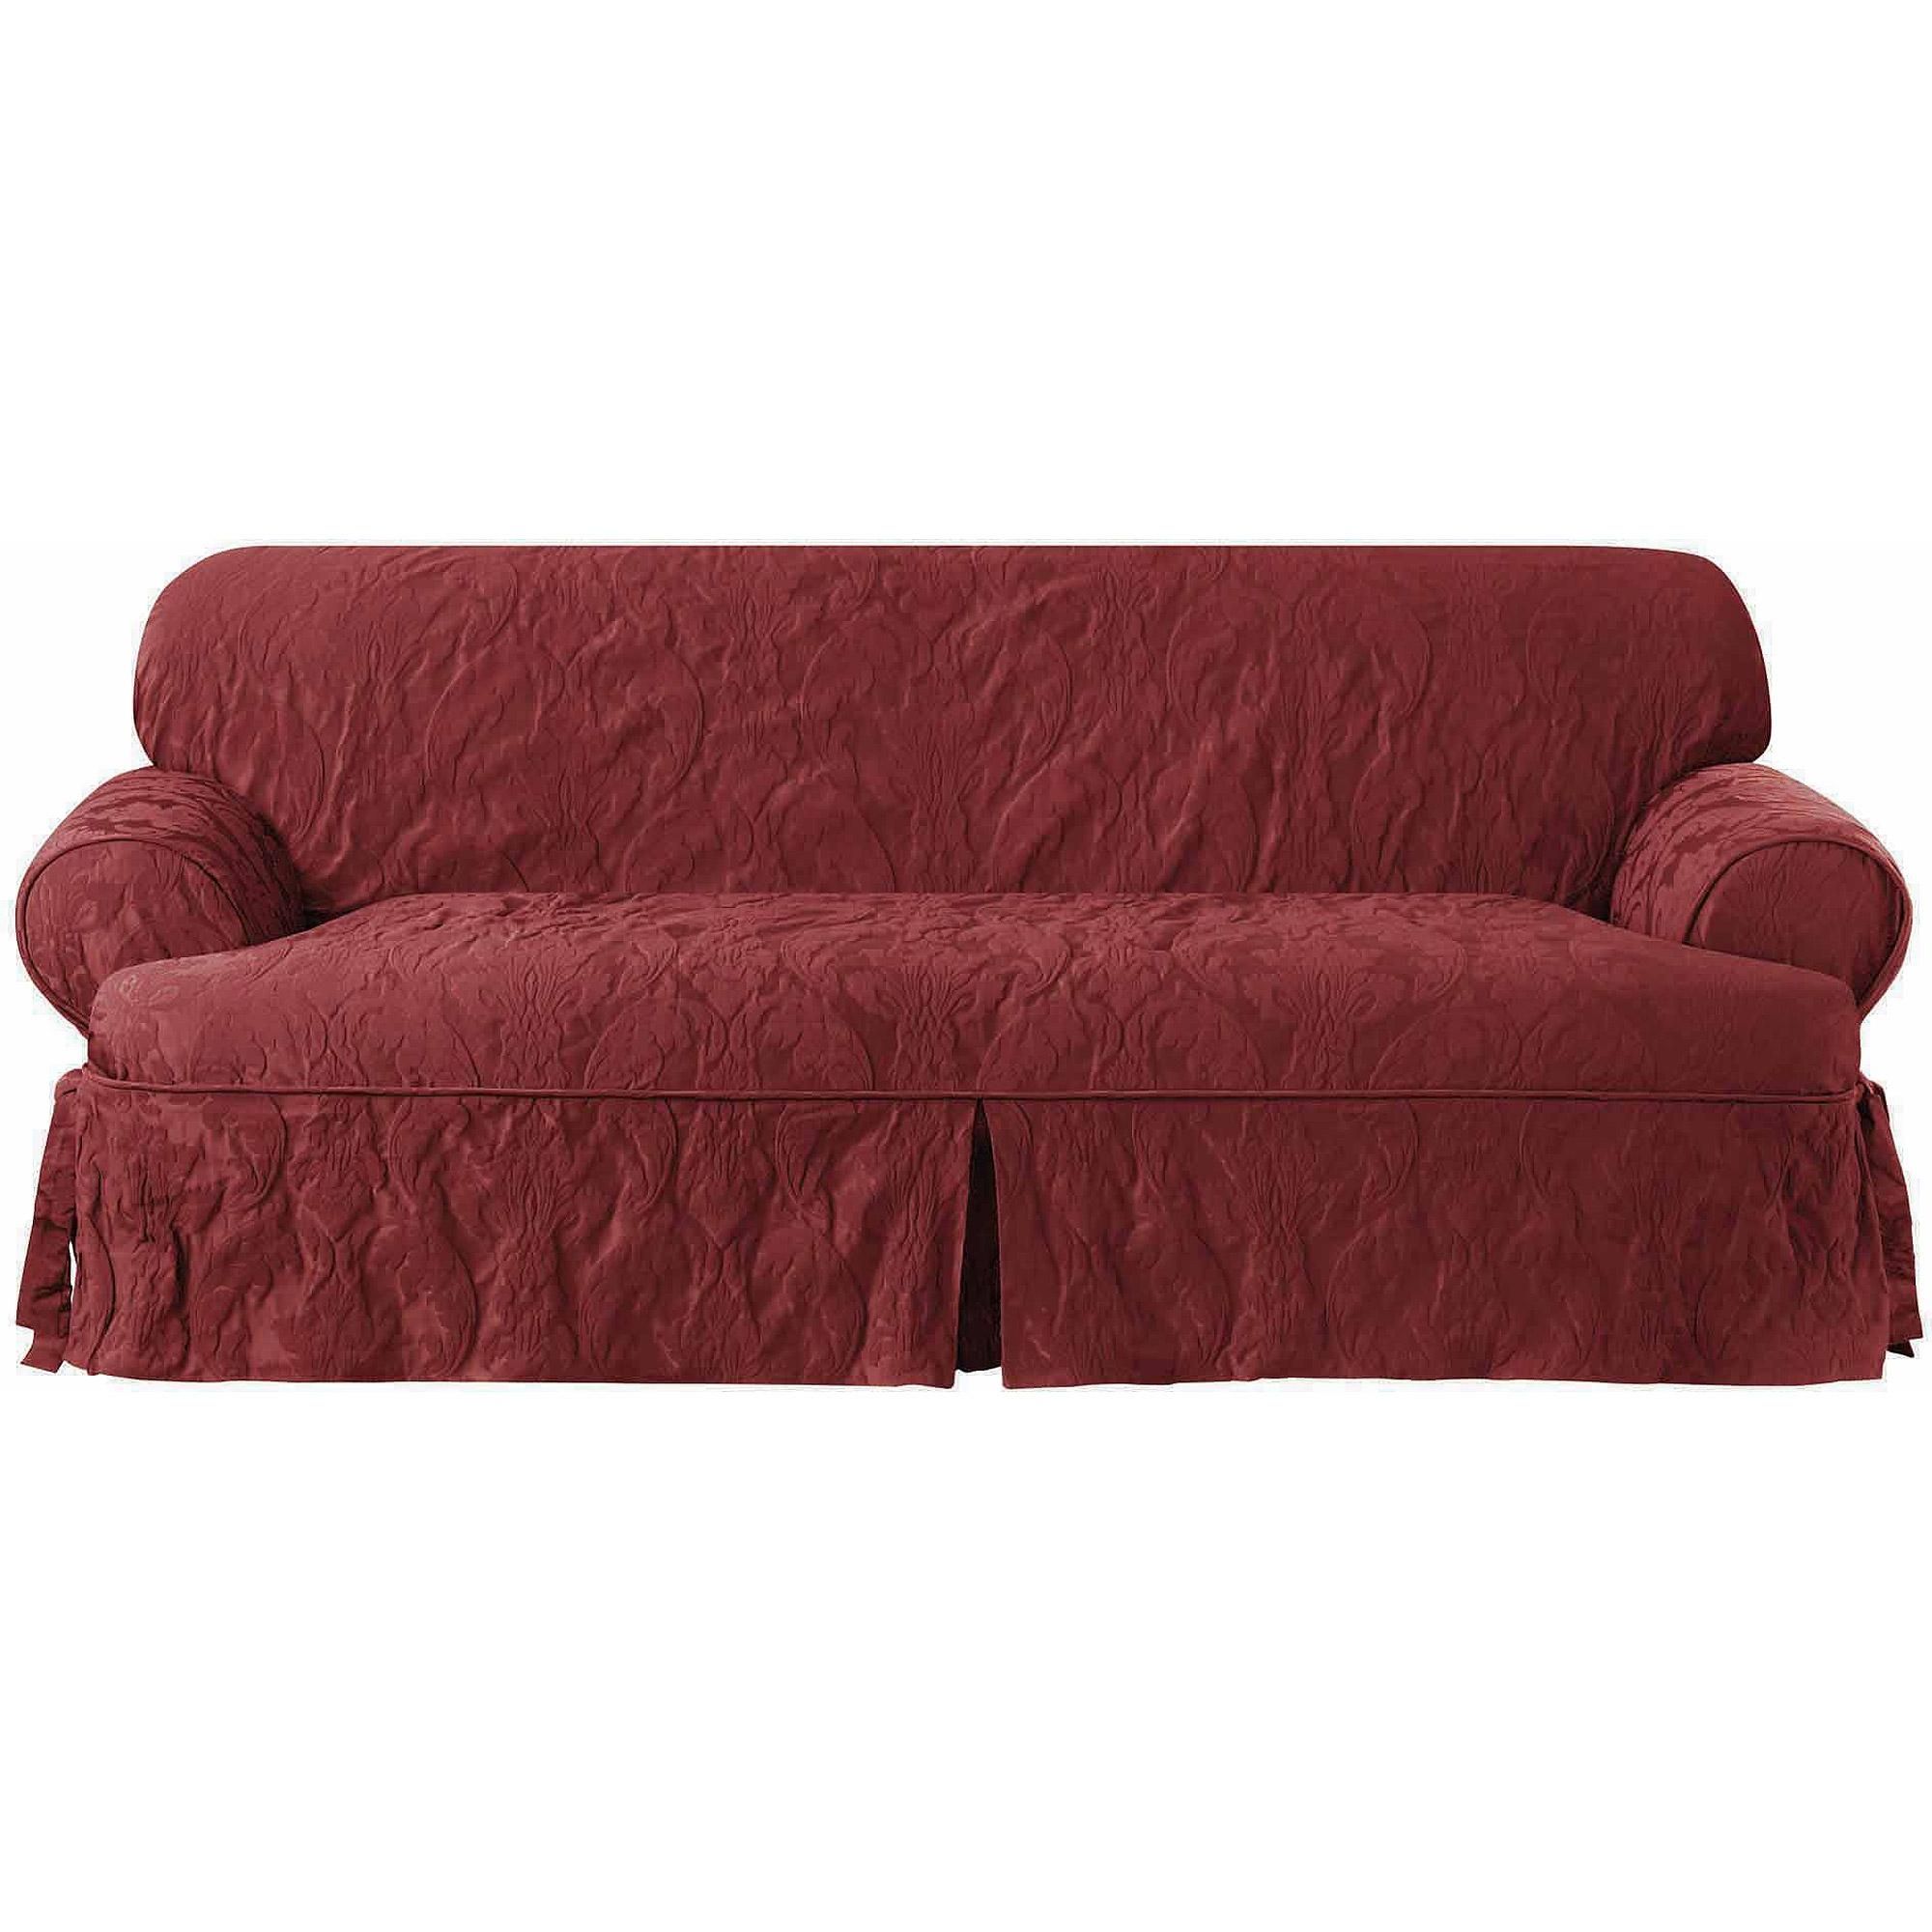 Furniture: Update Your Living Room With Best Sofa Slipcover Design For 3 Piece Sectional Sofa Slipcovers (View 2 of 20)